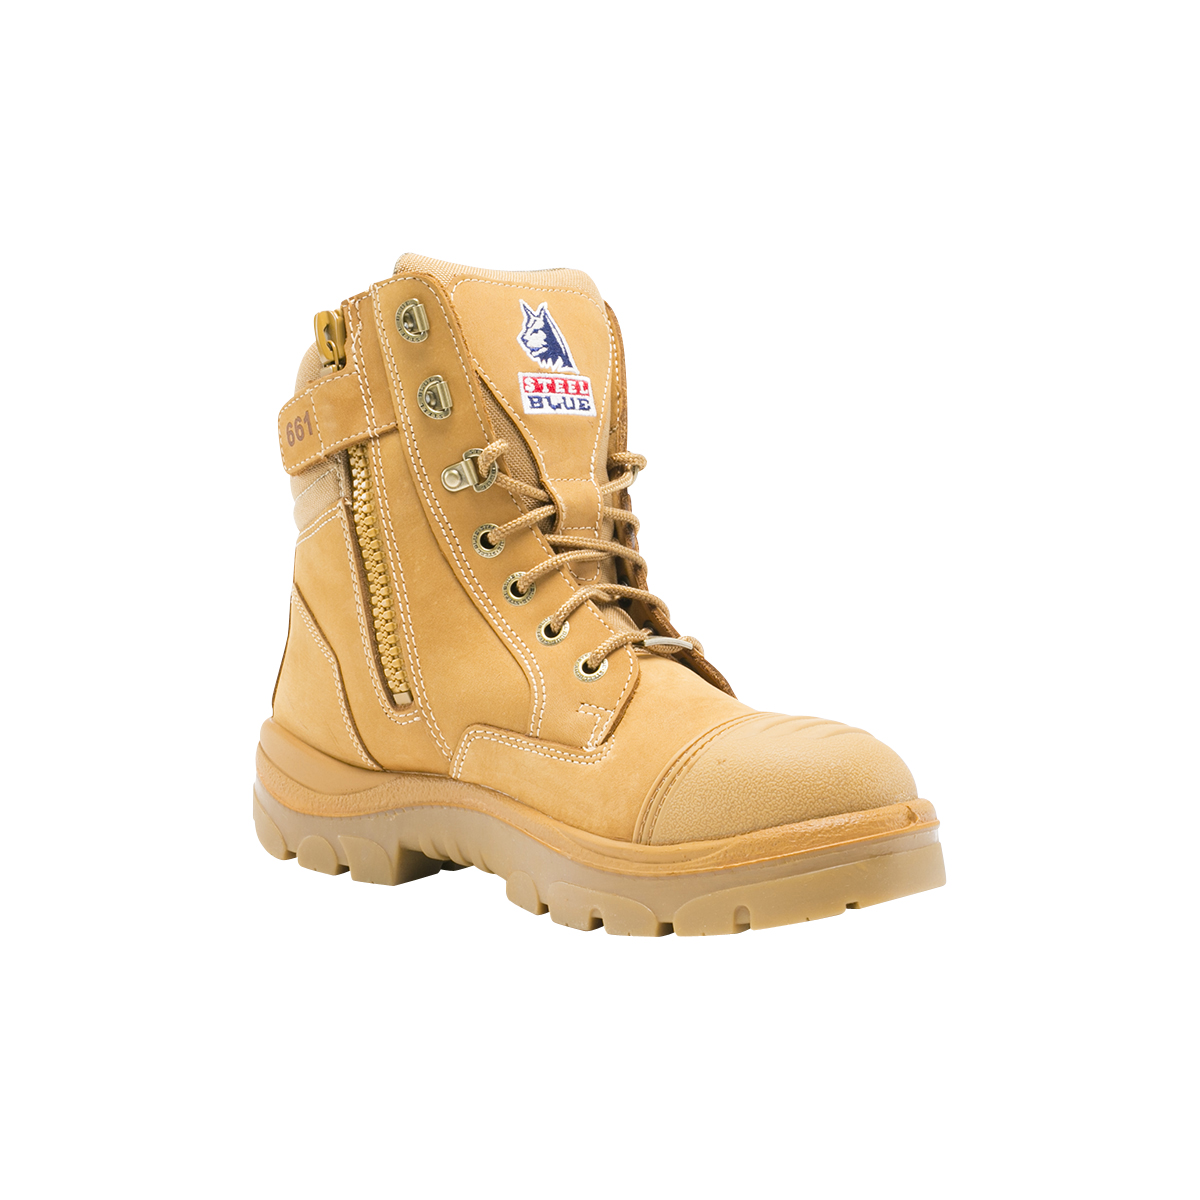 SAFETY BOOT SOUTHERN X WHEAT S10 - ZIP SIDE SCUFF CAP